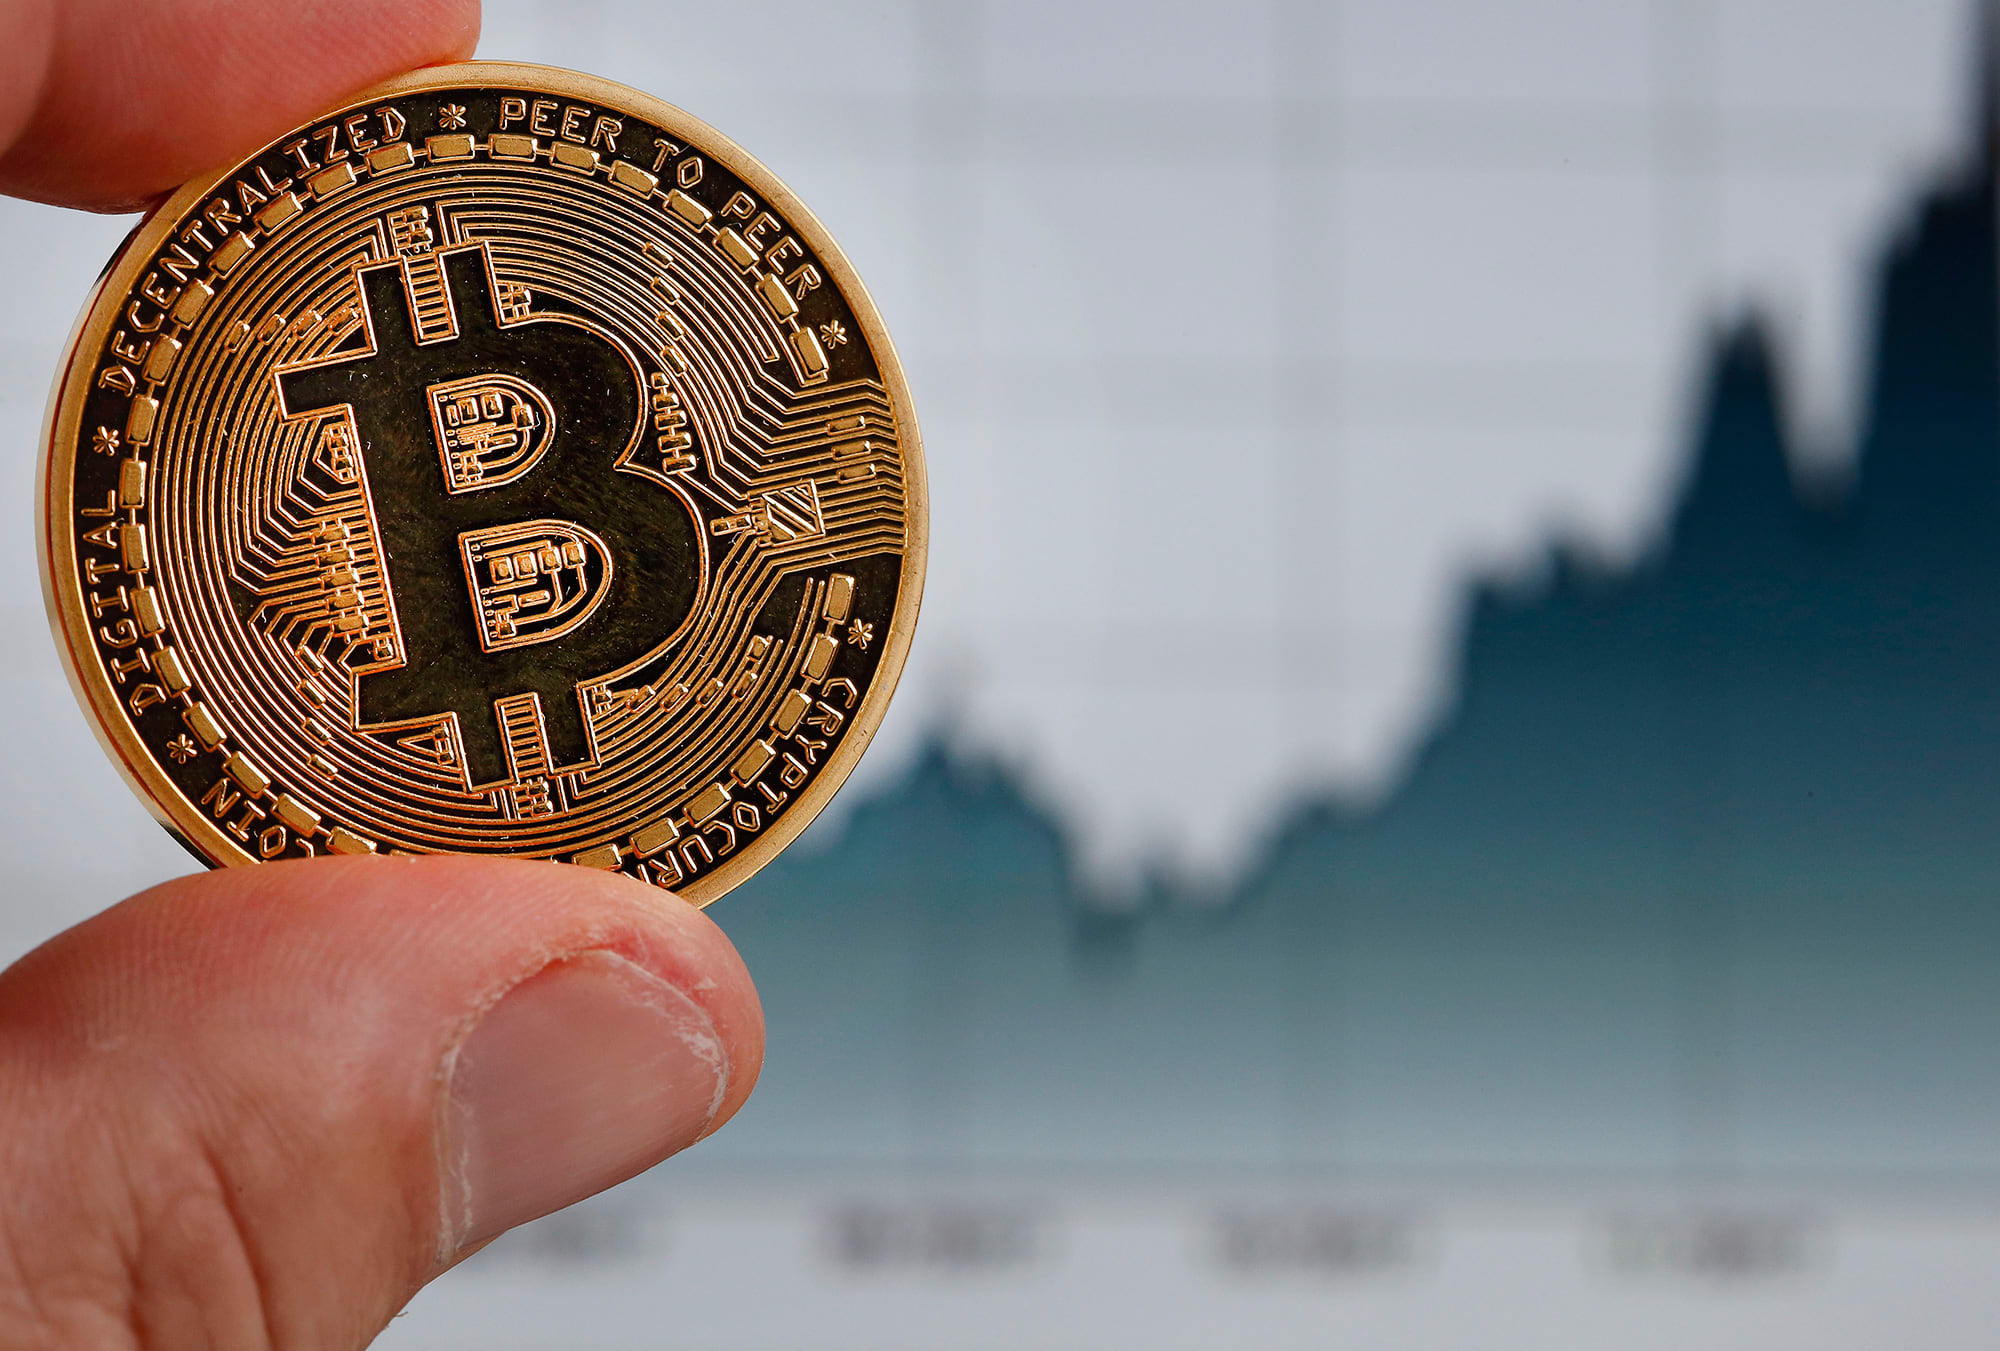 Price manipulation caused Bitcoin's huge surge, researchers say